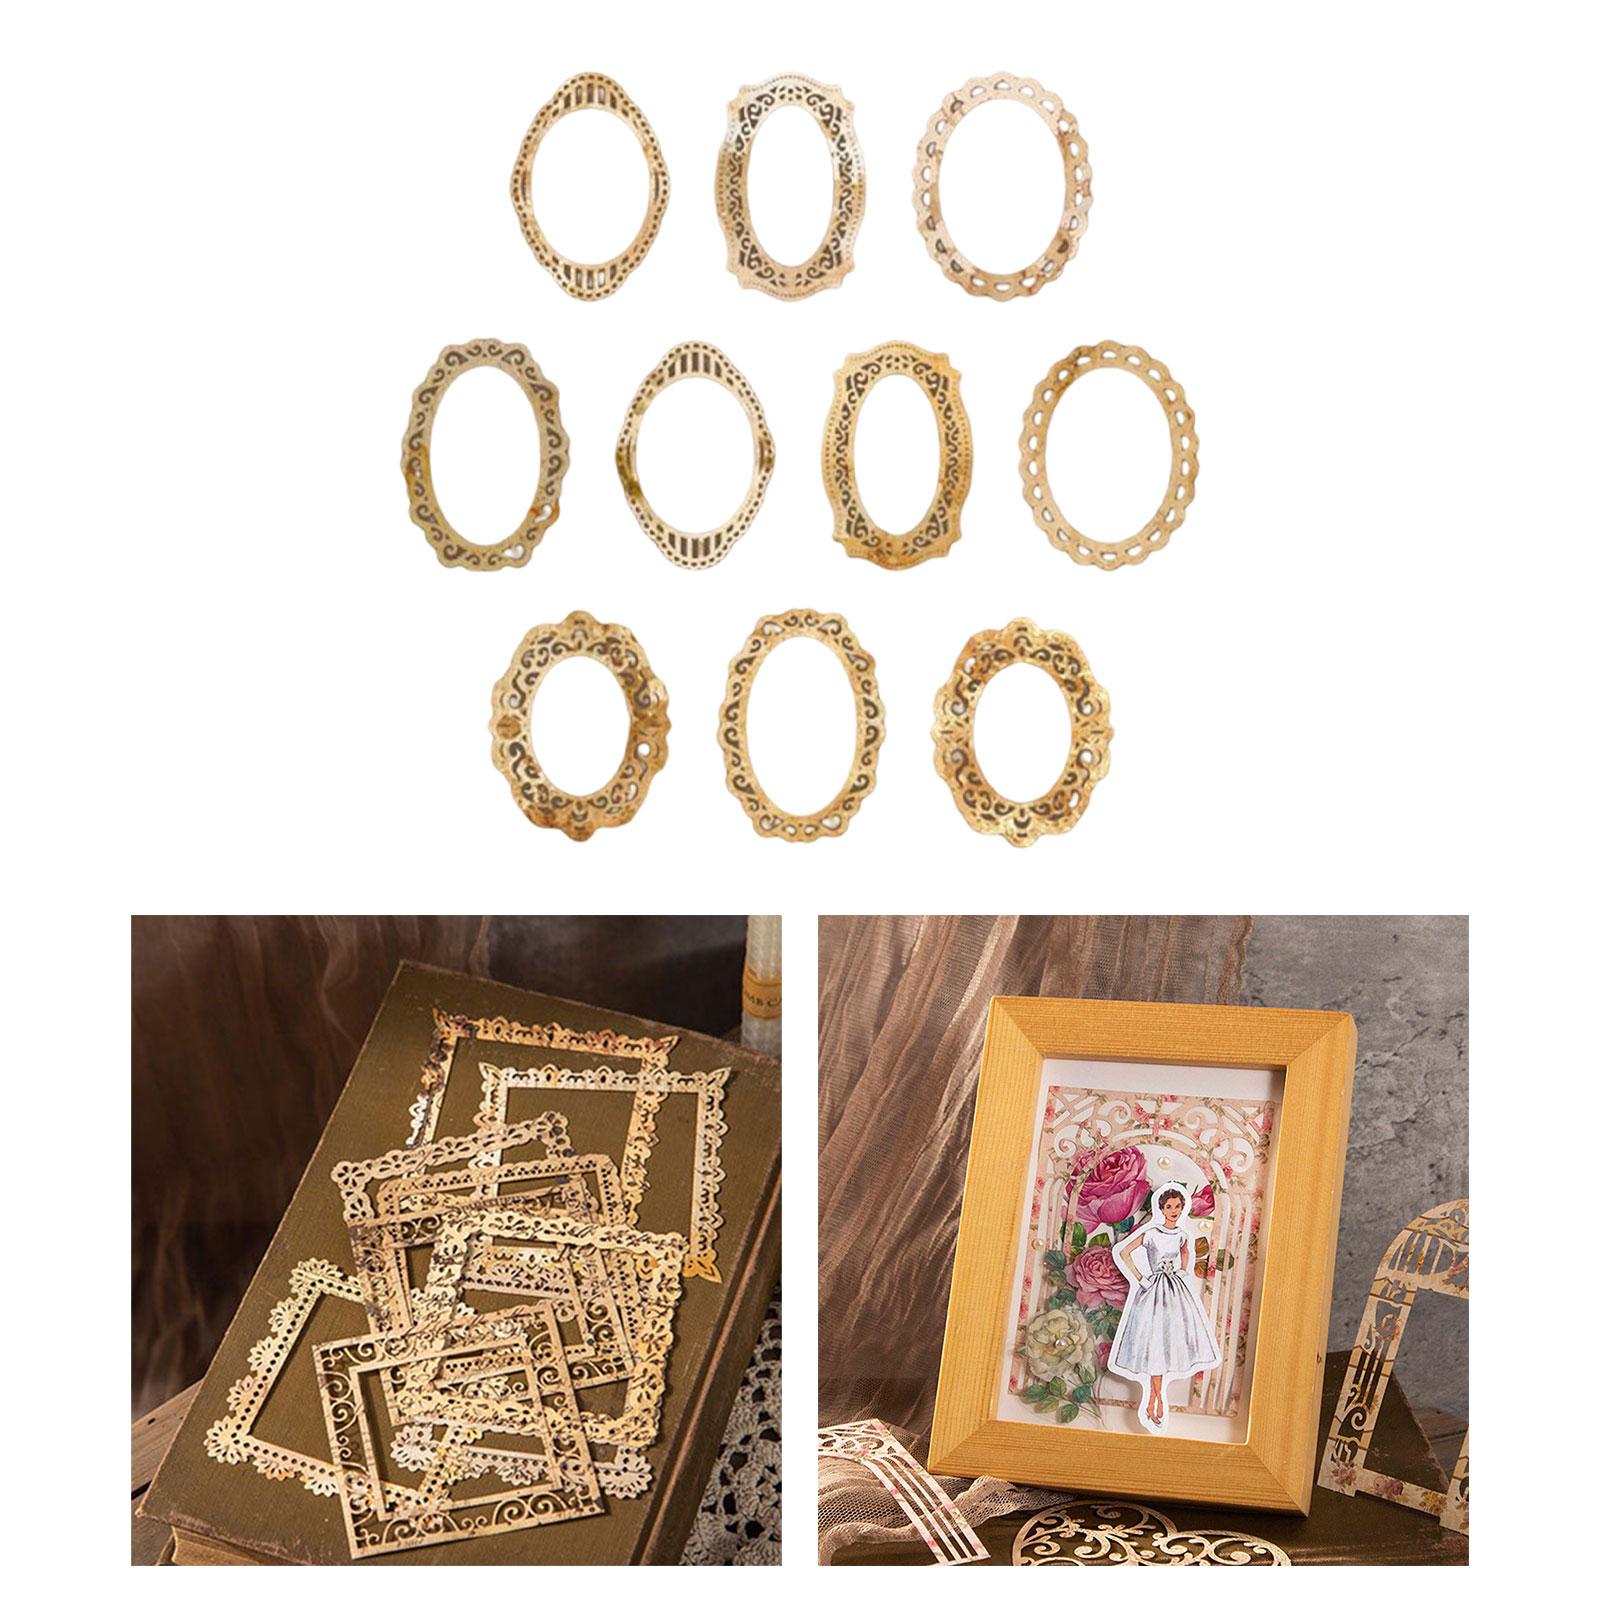 Decor Frame Scrapbooking Paper Craft Supplies for Card Making Planner Diary Oval